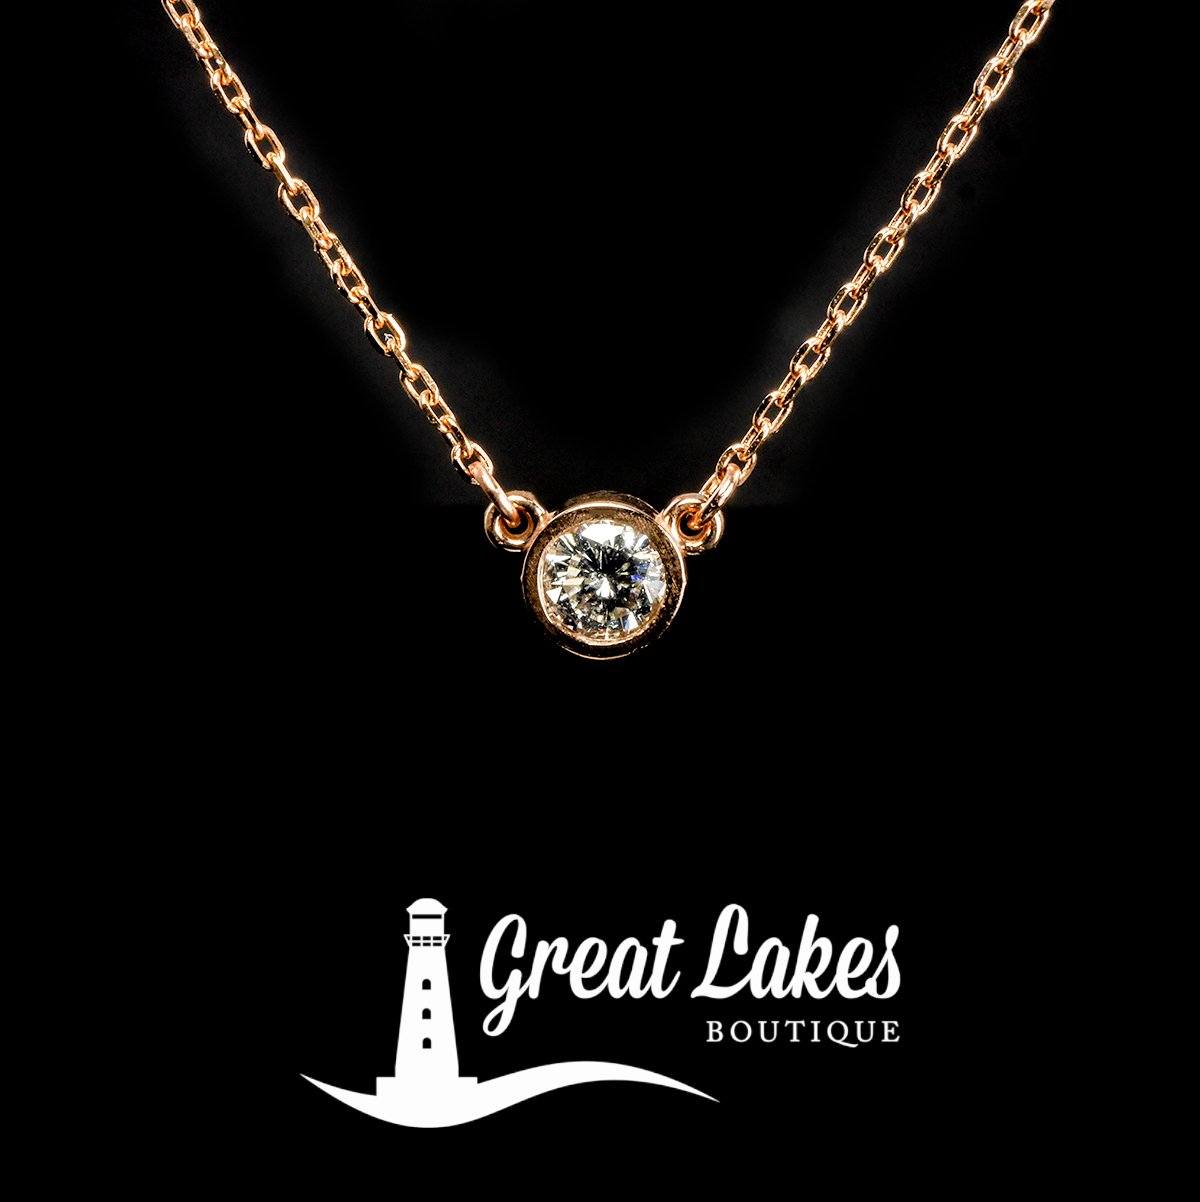 Great Lakes Boutique Rose Gold & Diamond Necklace